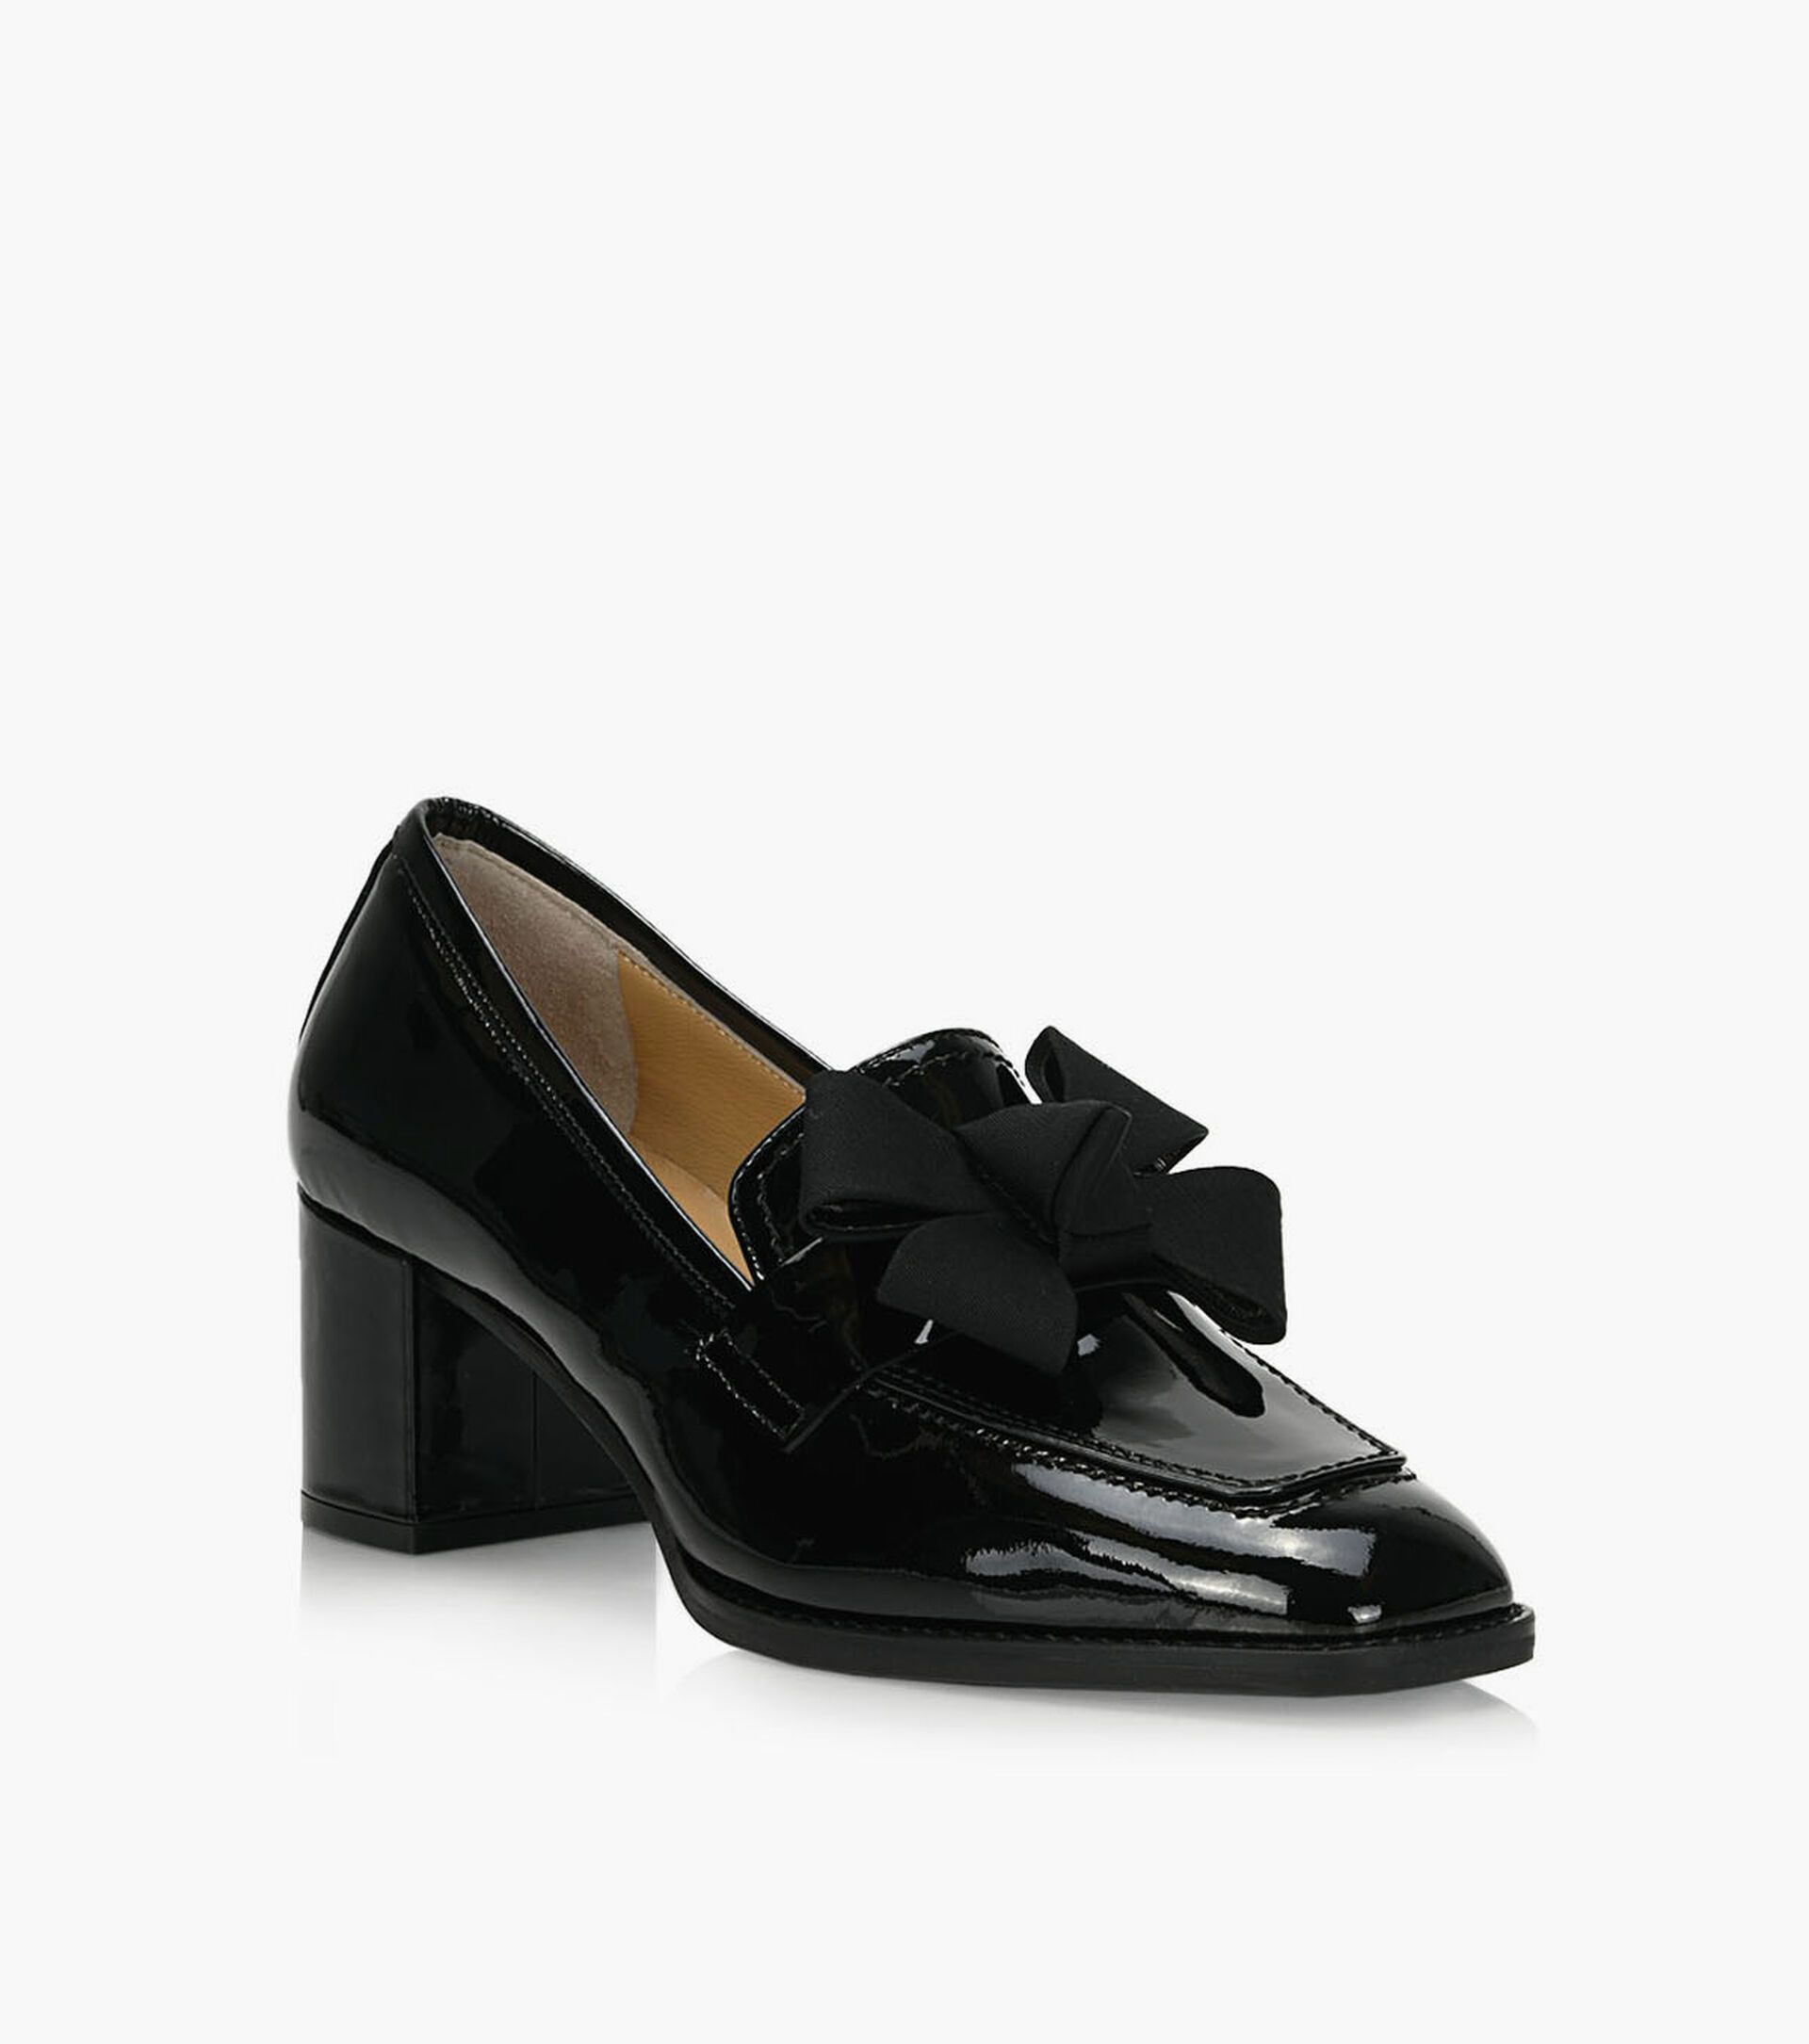 BROWNS COUTURE BEGONIA - Black Leather | BrownsShoes | Browns Shoes